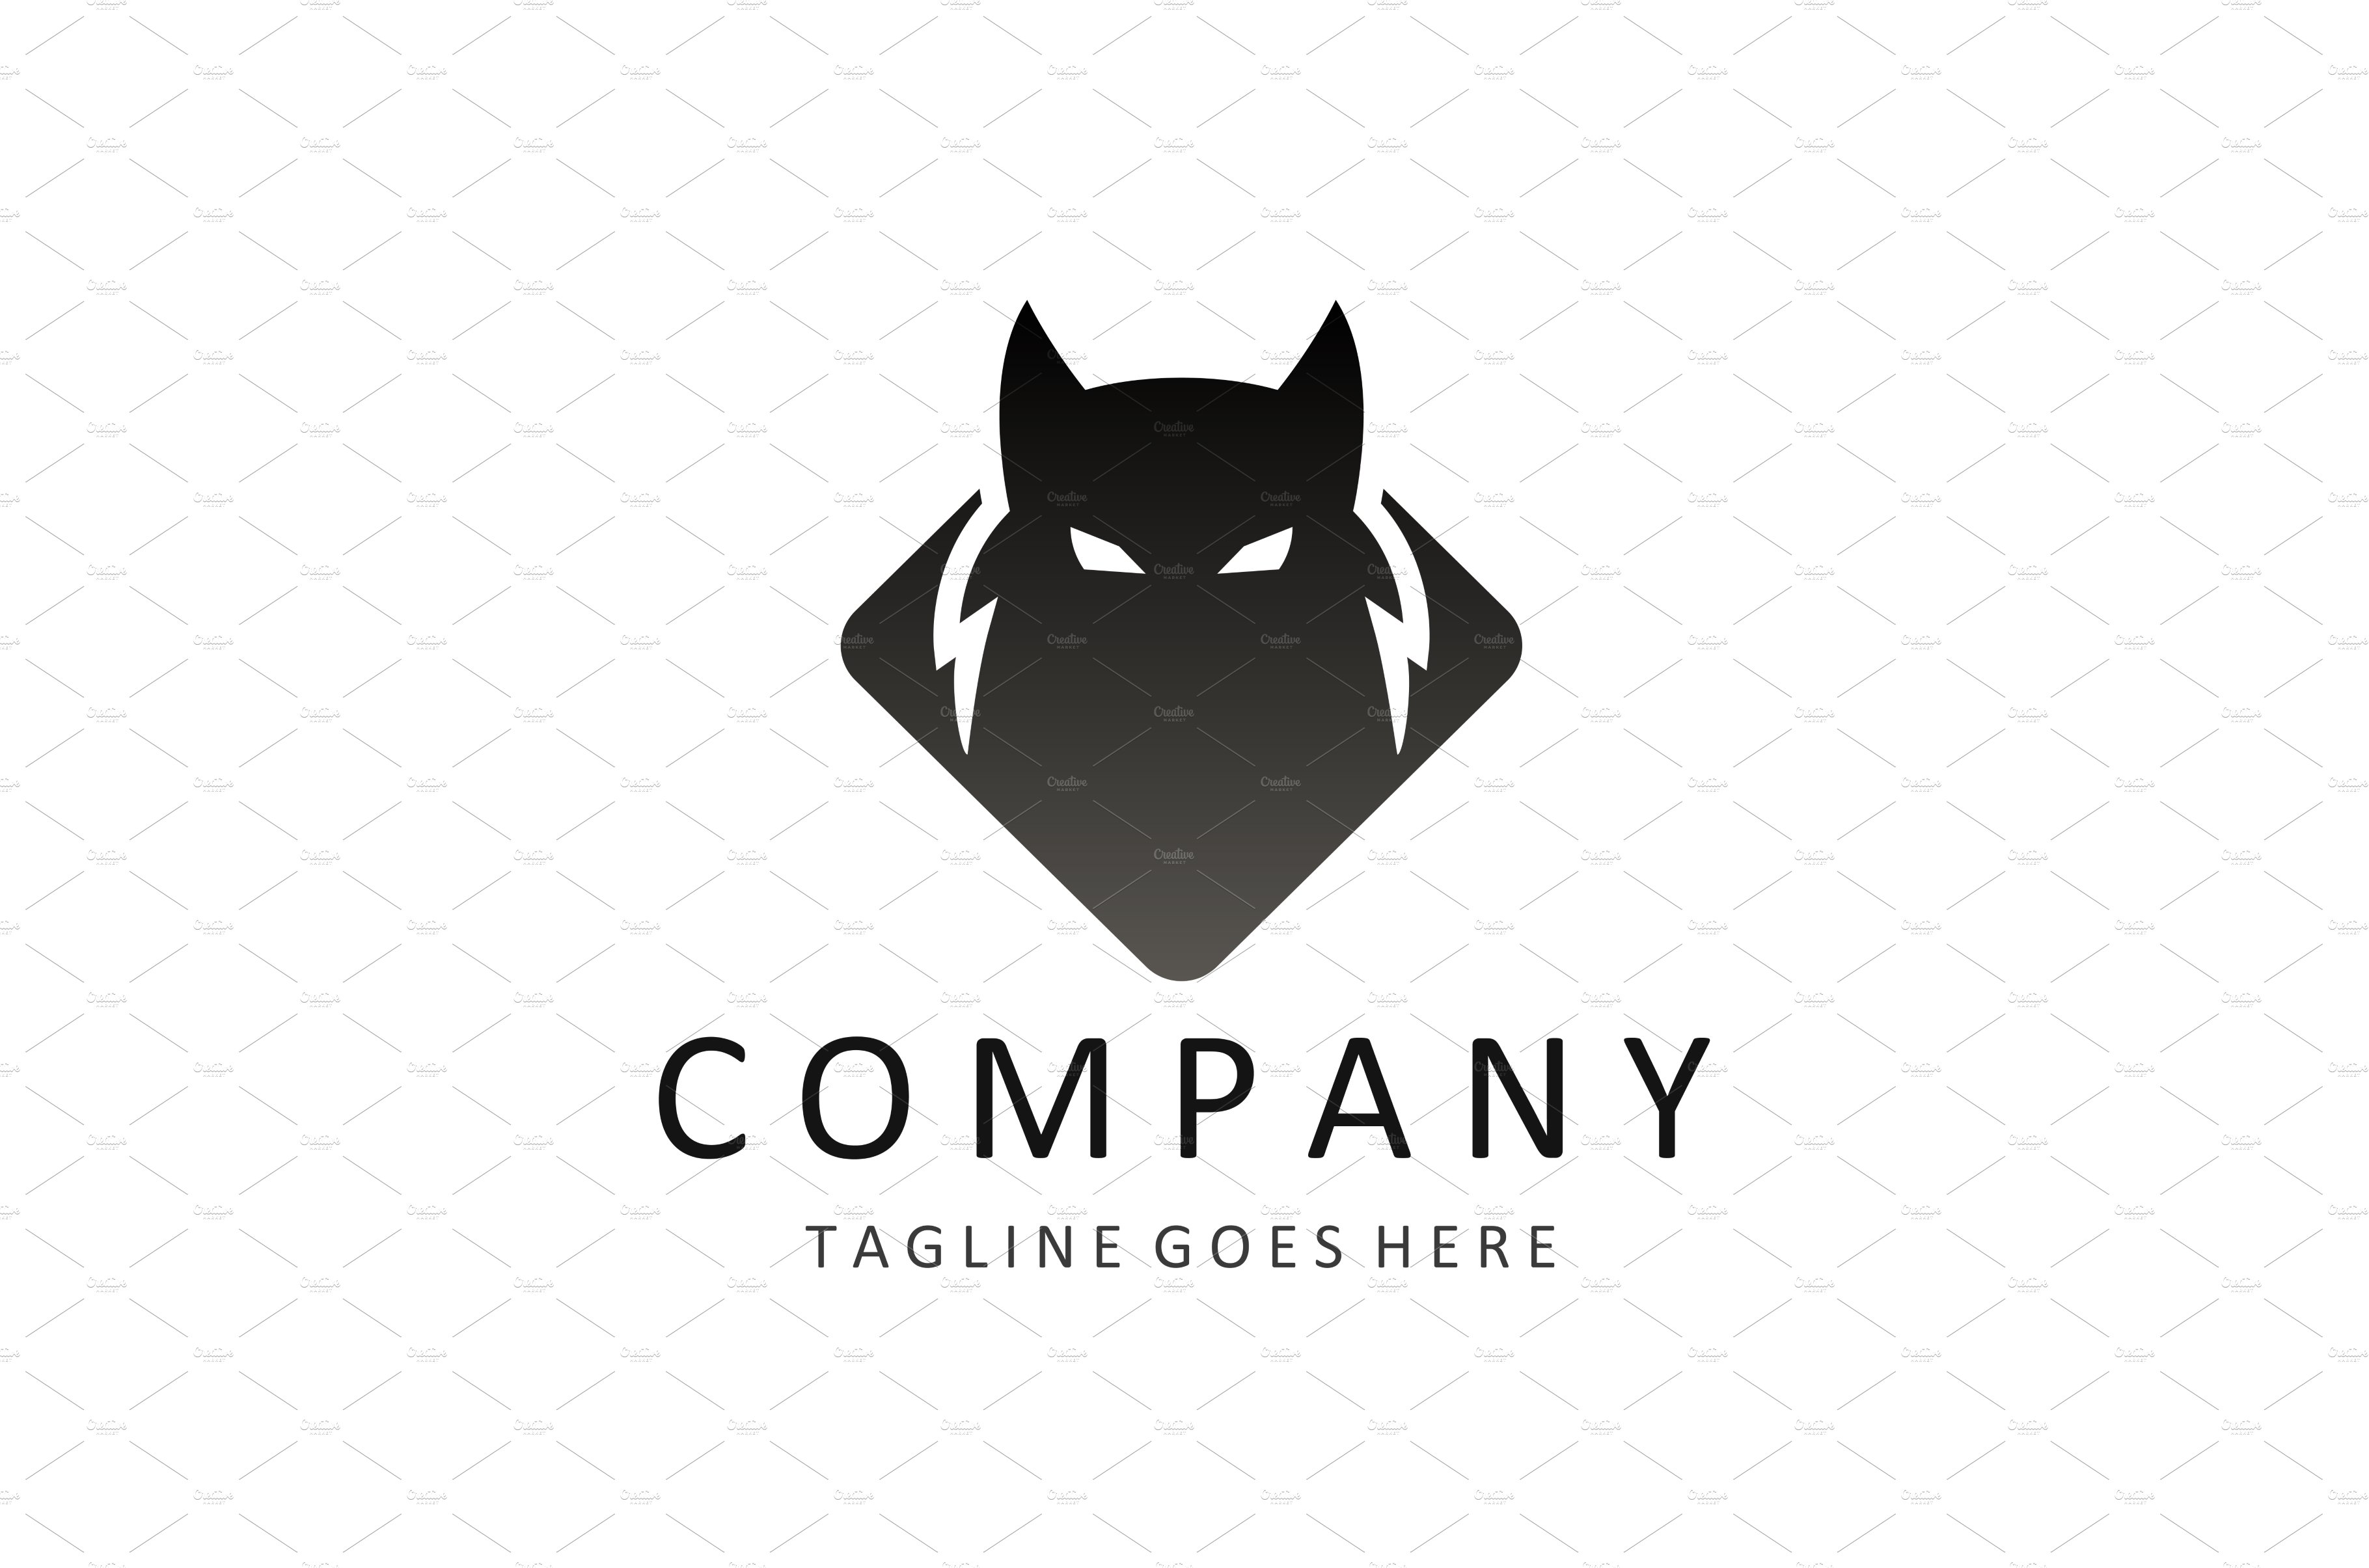 Wolf Logo Template from Animal Logo cover image.